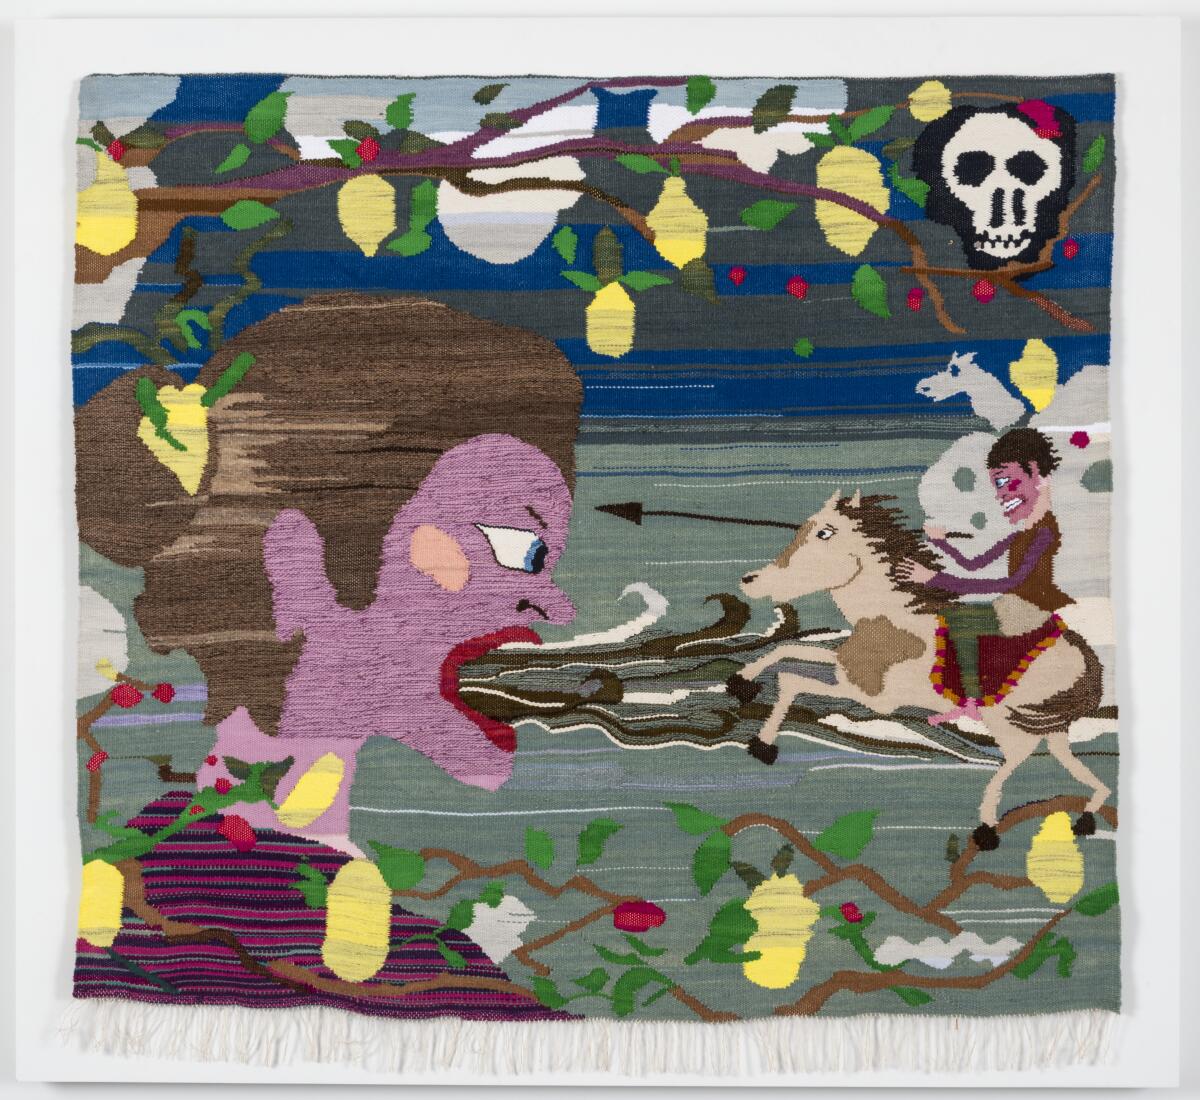 "Woman With Waves Coming Out of Her Mouth" by Christina Forrer, 2014. Wool, cotton and linen, 50 inches by 56 inches